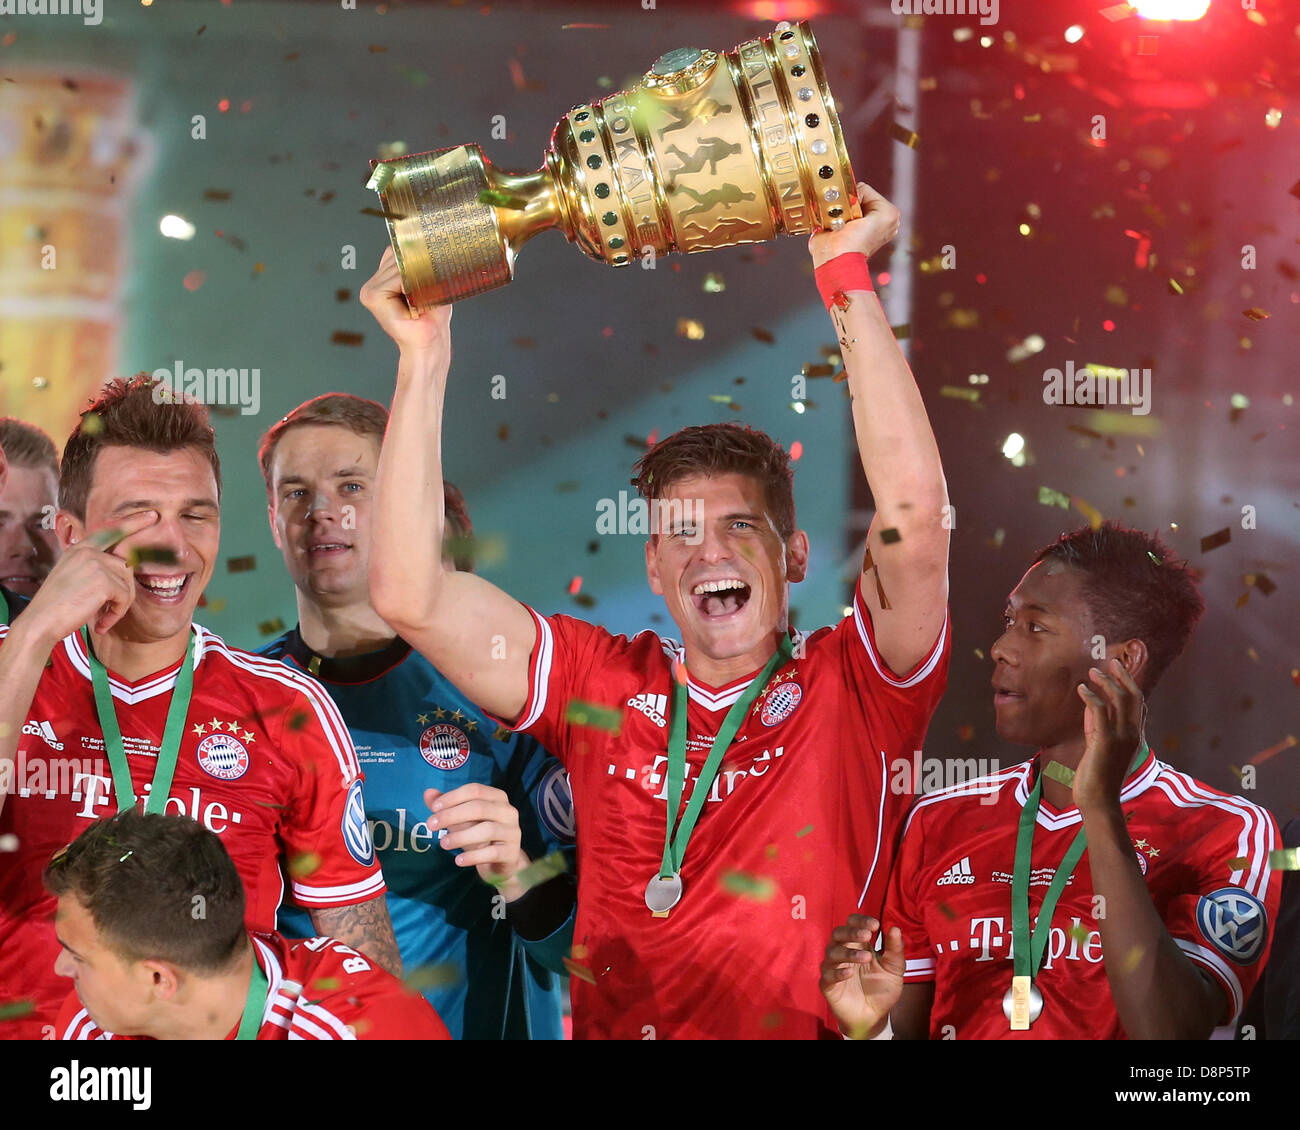 Berlin, Germany. 1st June, 2013. Munich's Mario Gomez celebrates after  winning the German DFB Cup final soccer match between FC Bayern Munich and  VfB Stuttgart at the Olympic Stadium in Berlin, Germany,